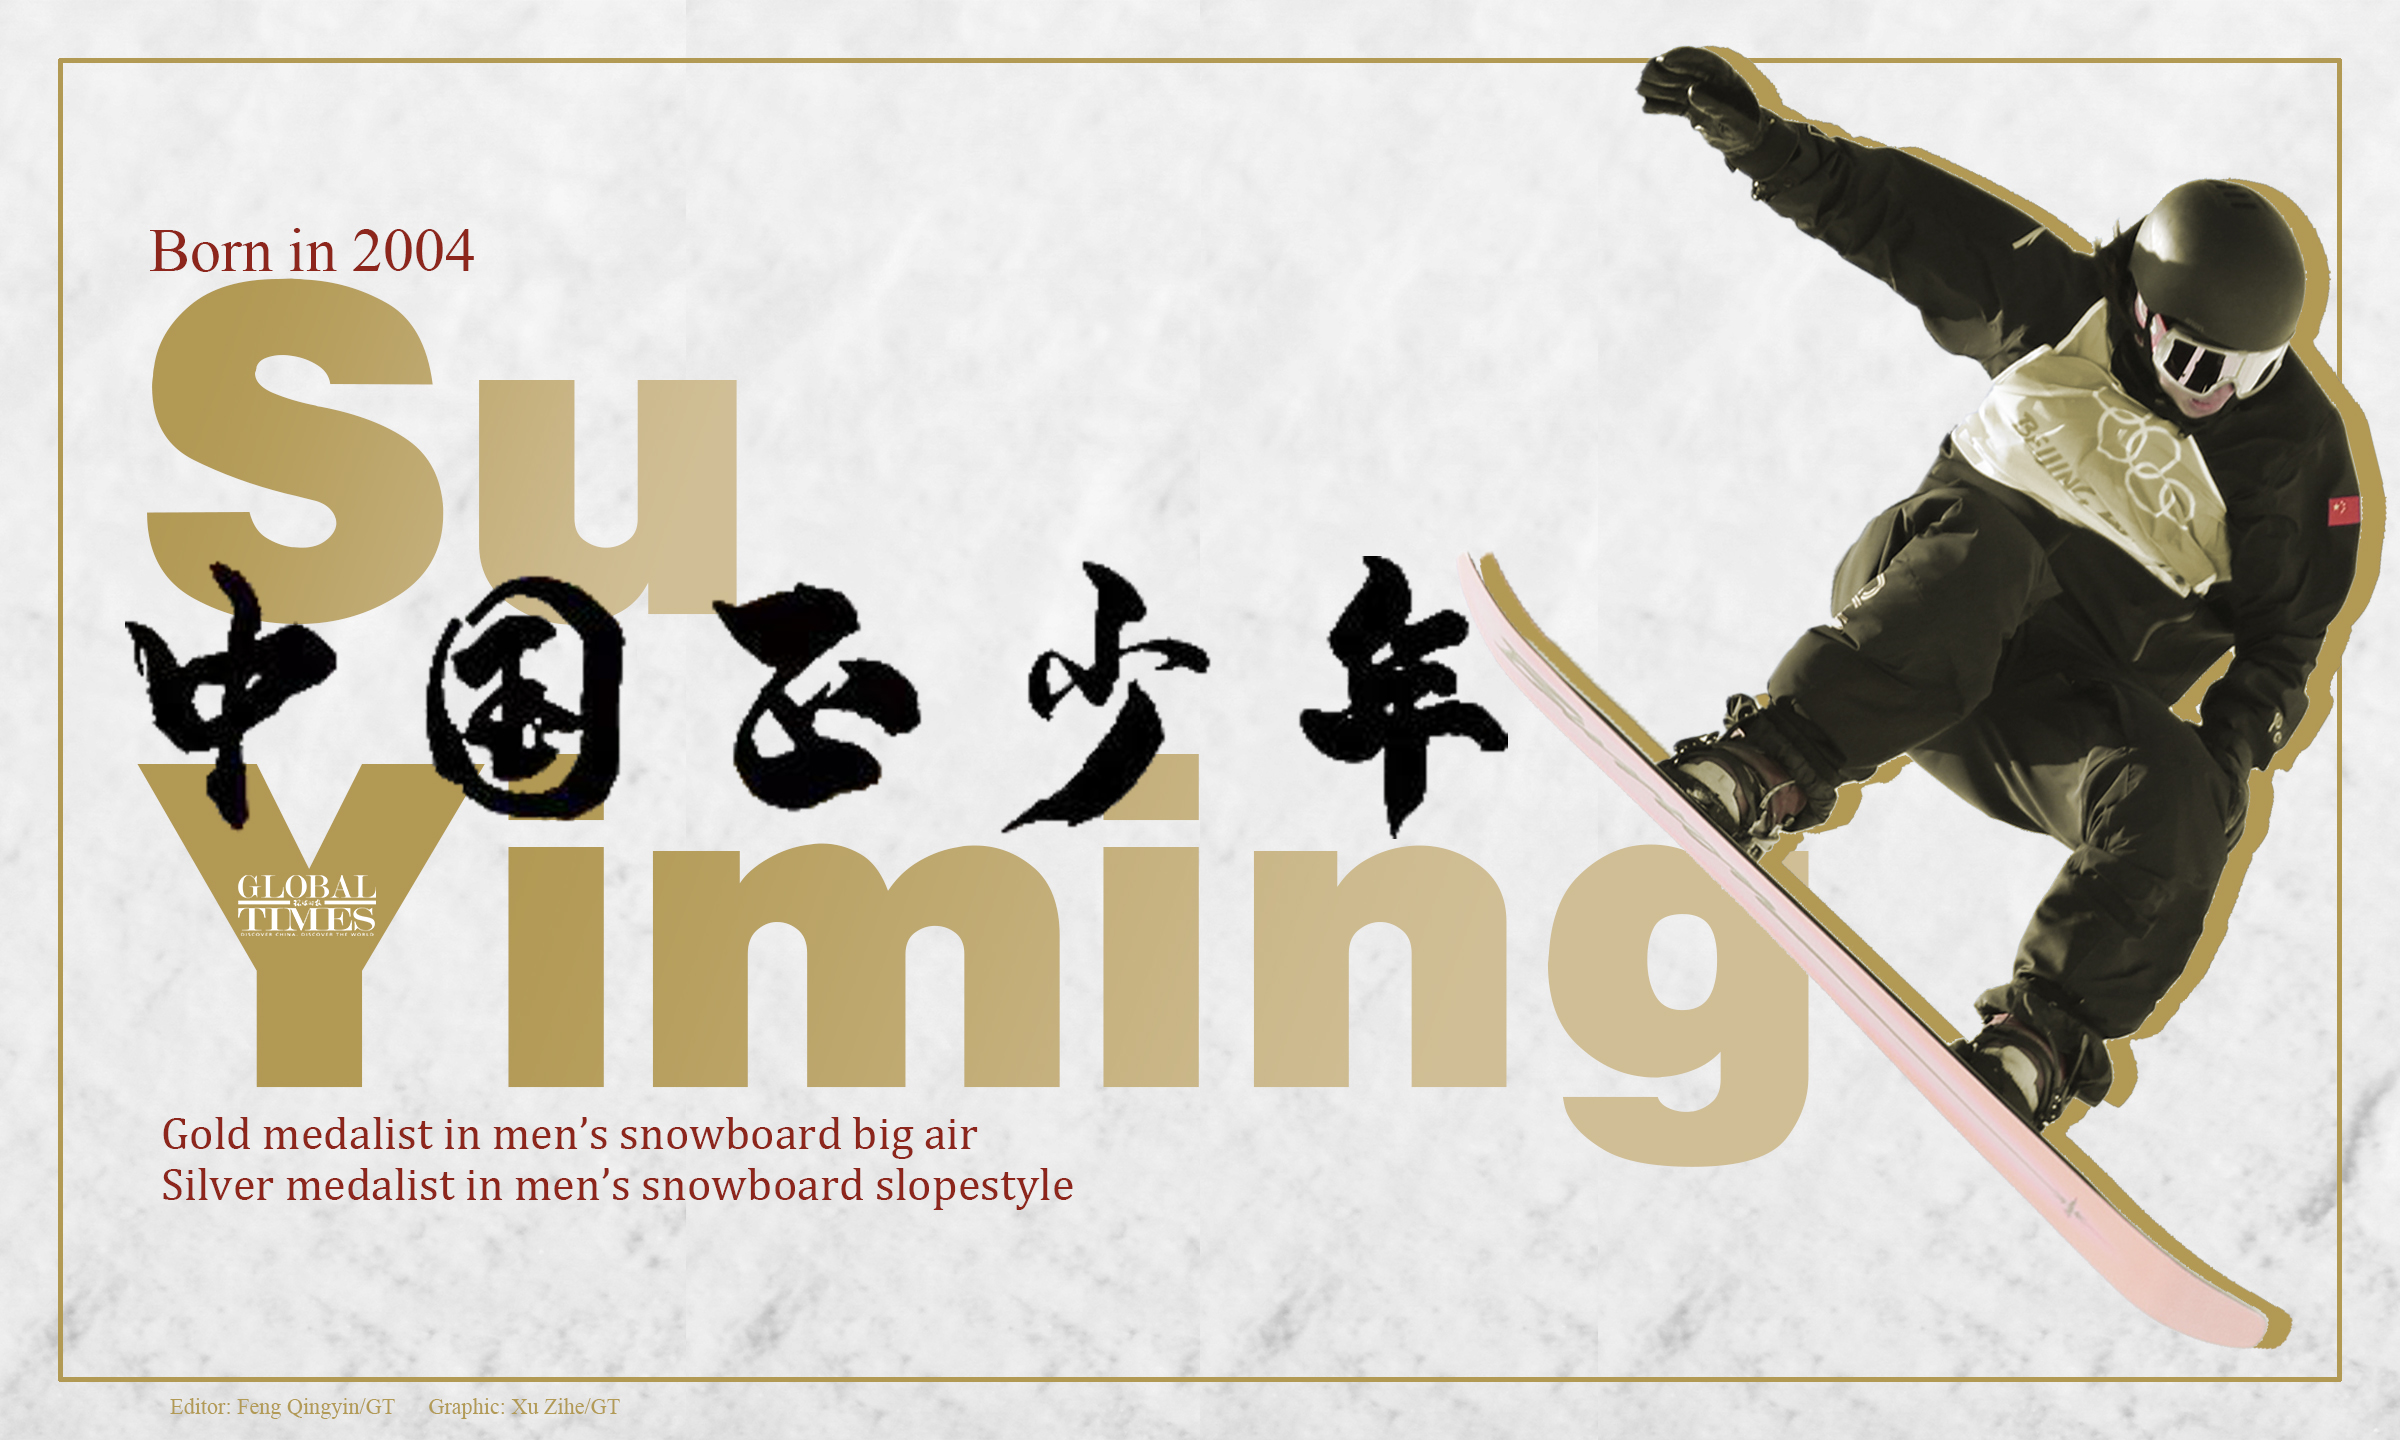 17-year-old Chinese athlete Su Yiming won the 6th gold medal for Team China in the men's snowboard big air at Beijing 2022 on Tue. He made history by bagging one gold and one silver at this year's Olympics. Graphic: Xu Zihe/GT